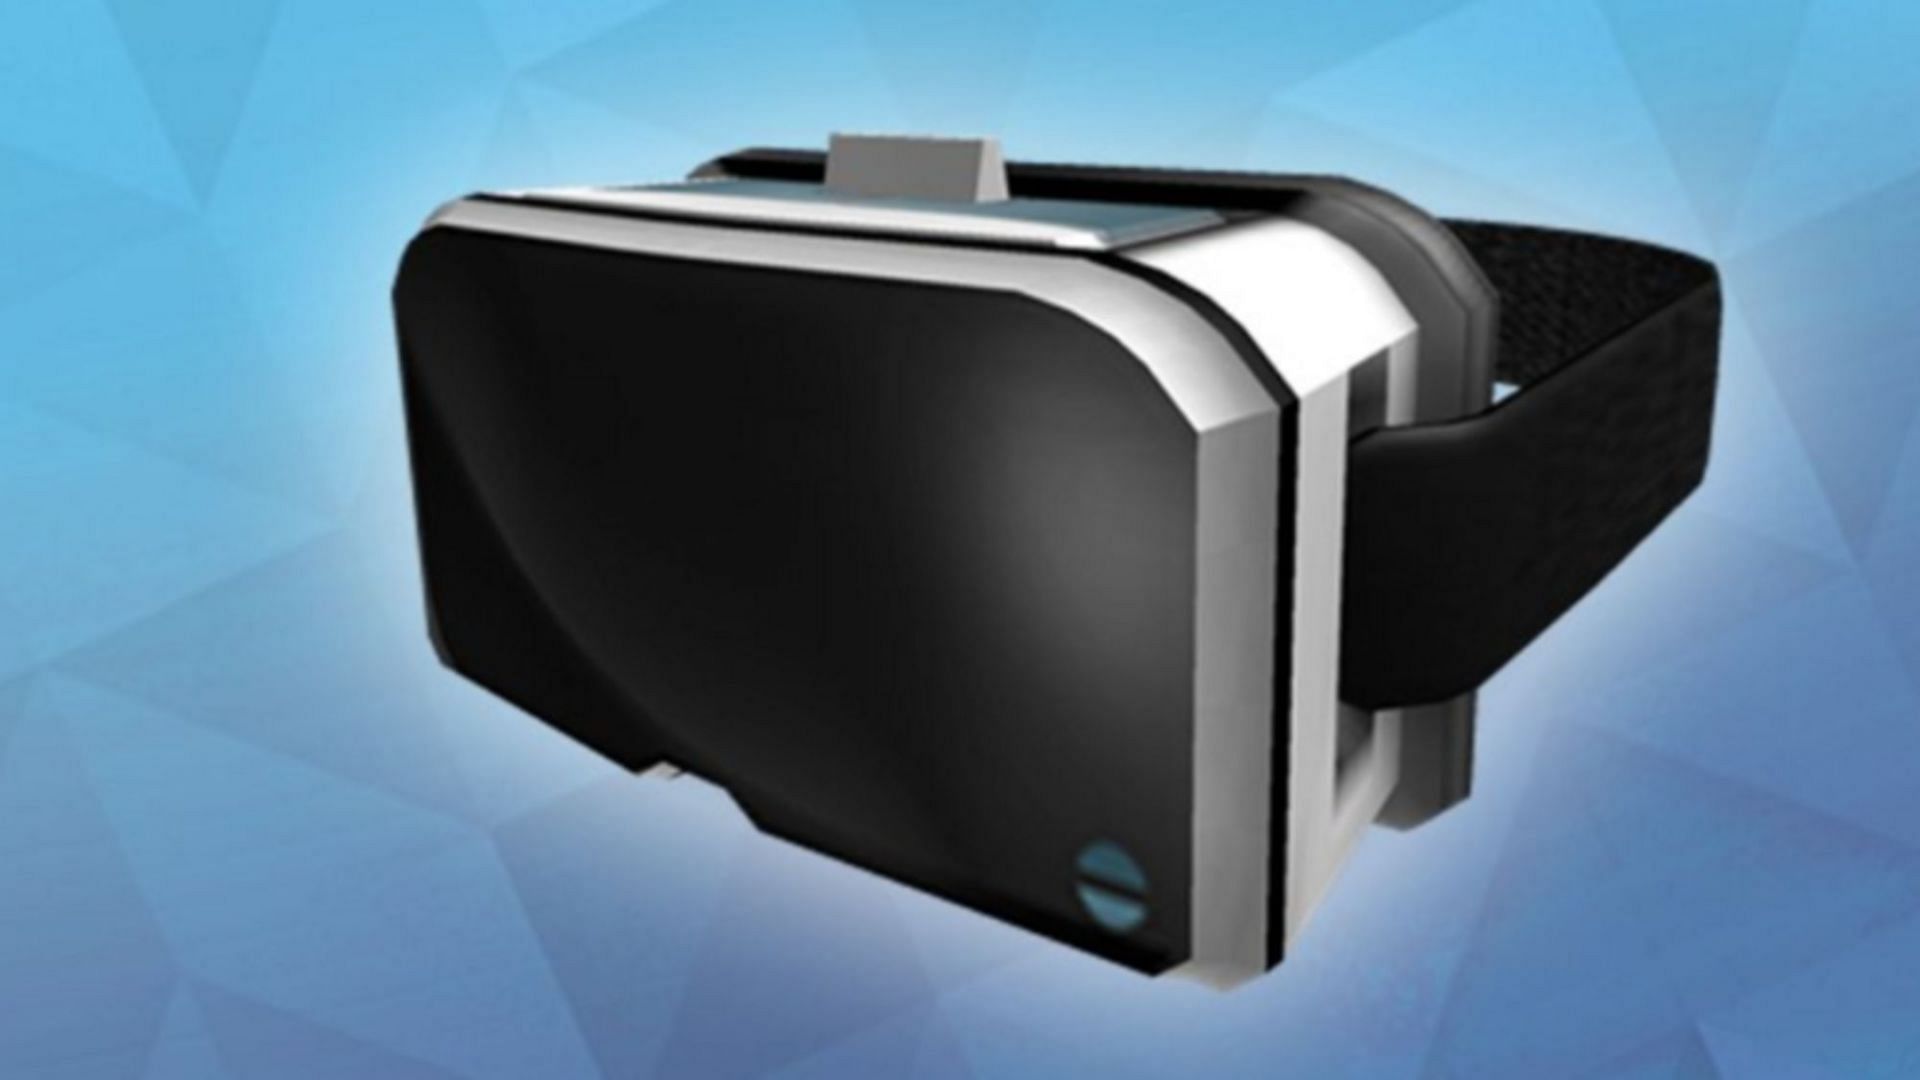 Enjoy the VR experience in Roblox (Image via Roblox)